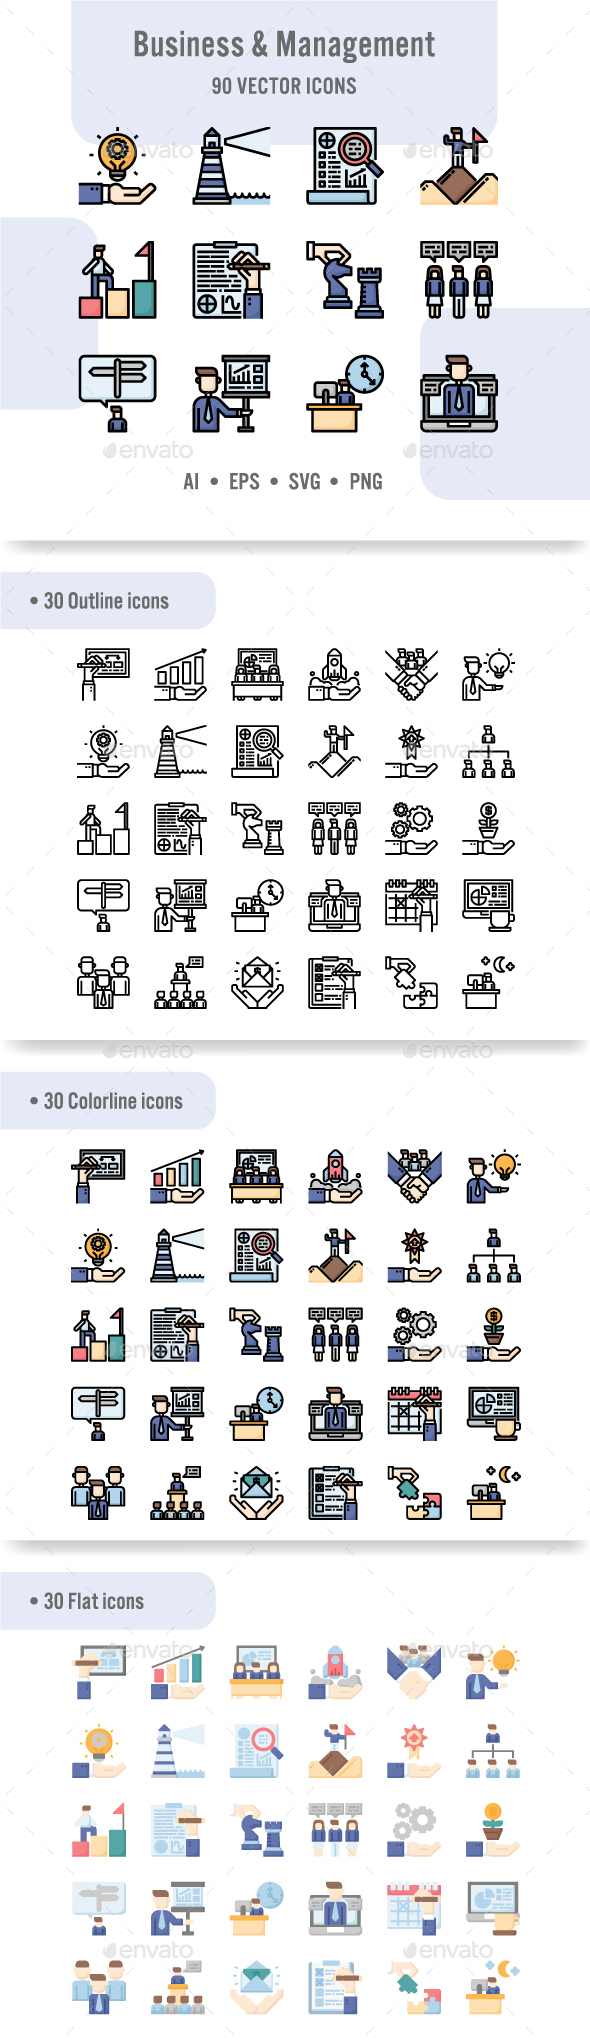 Business and Management Icon Set